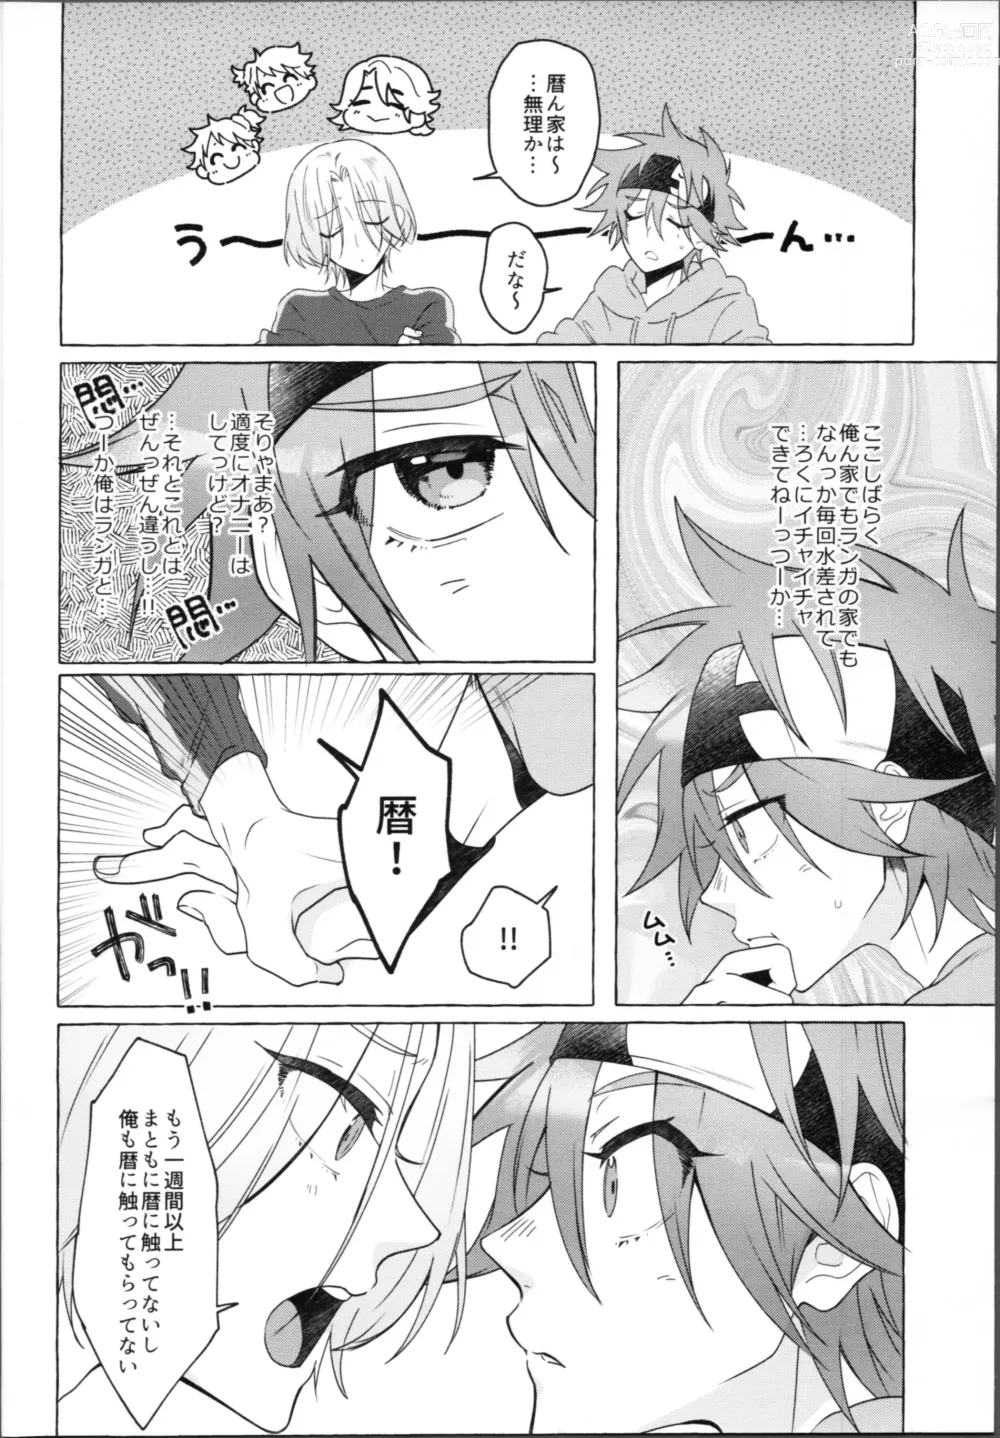 Page 5 of doujinshi Love Hotel tte Donna Toko?